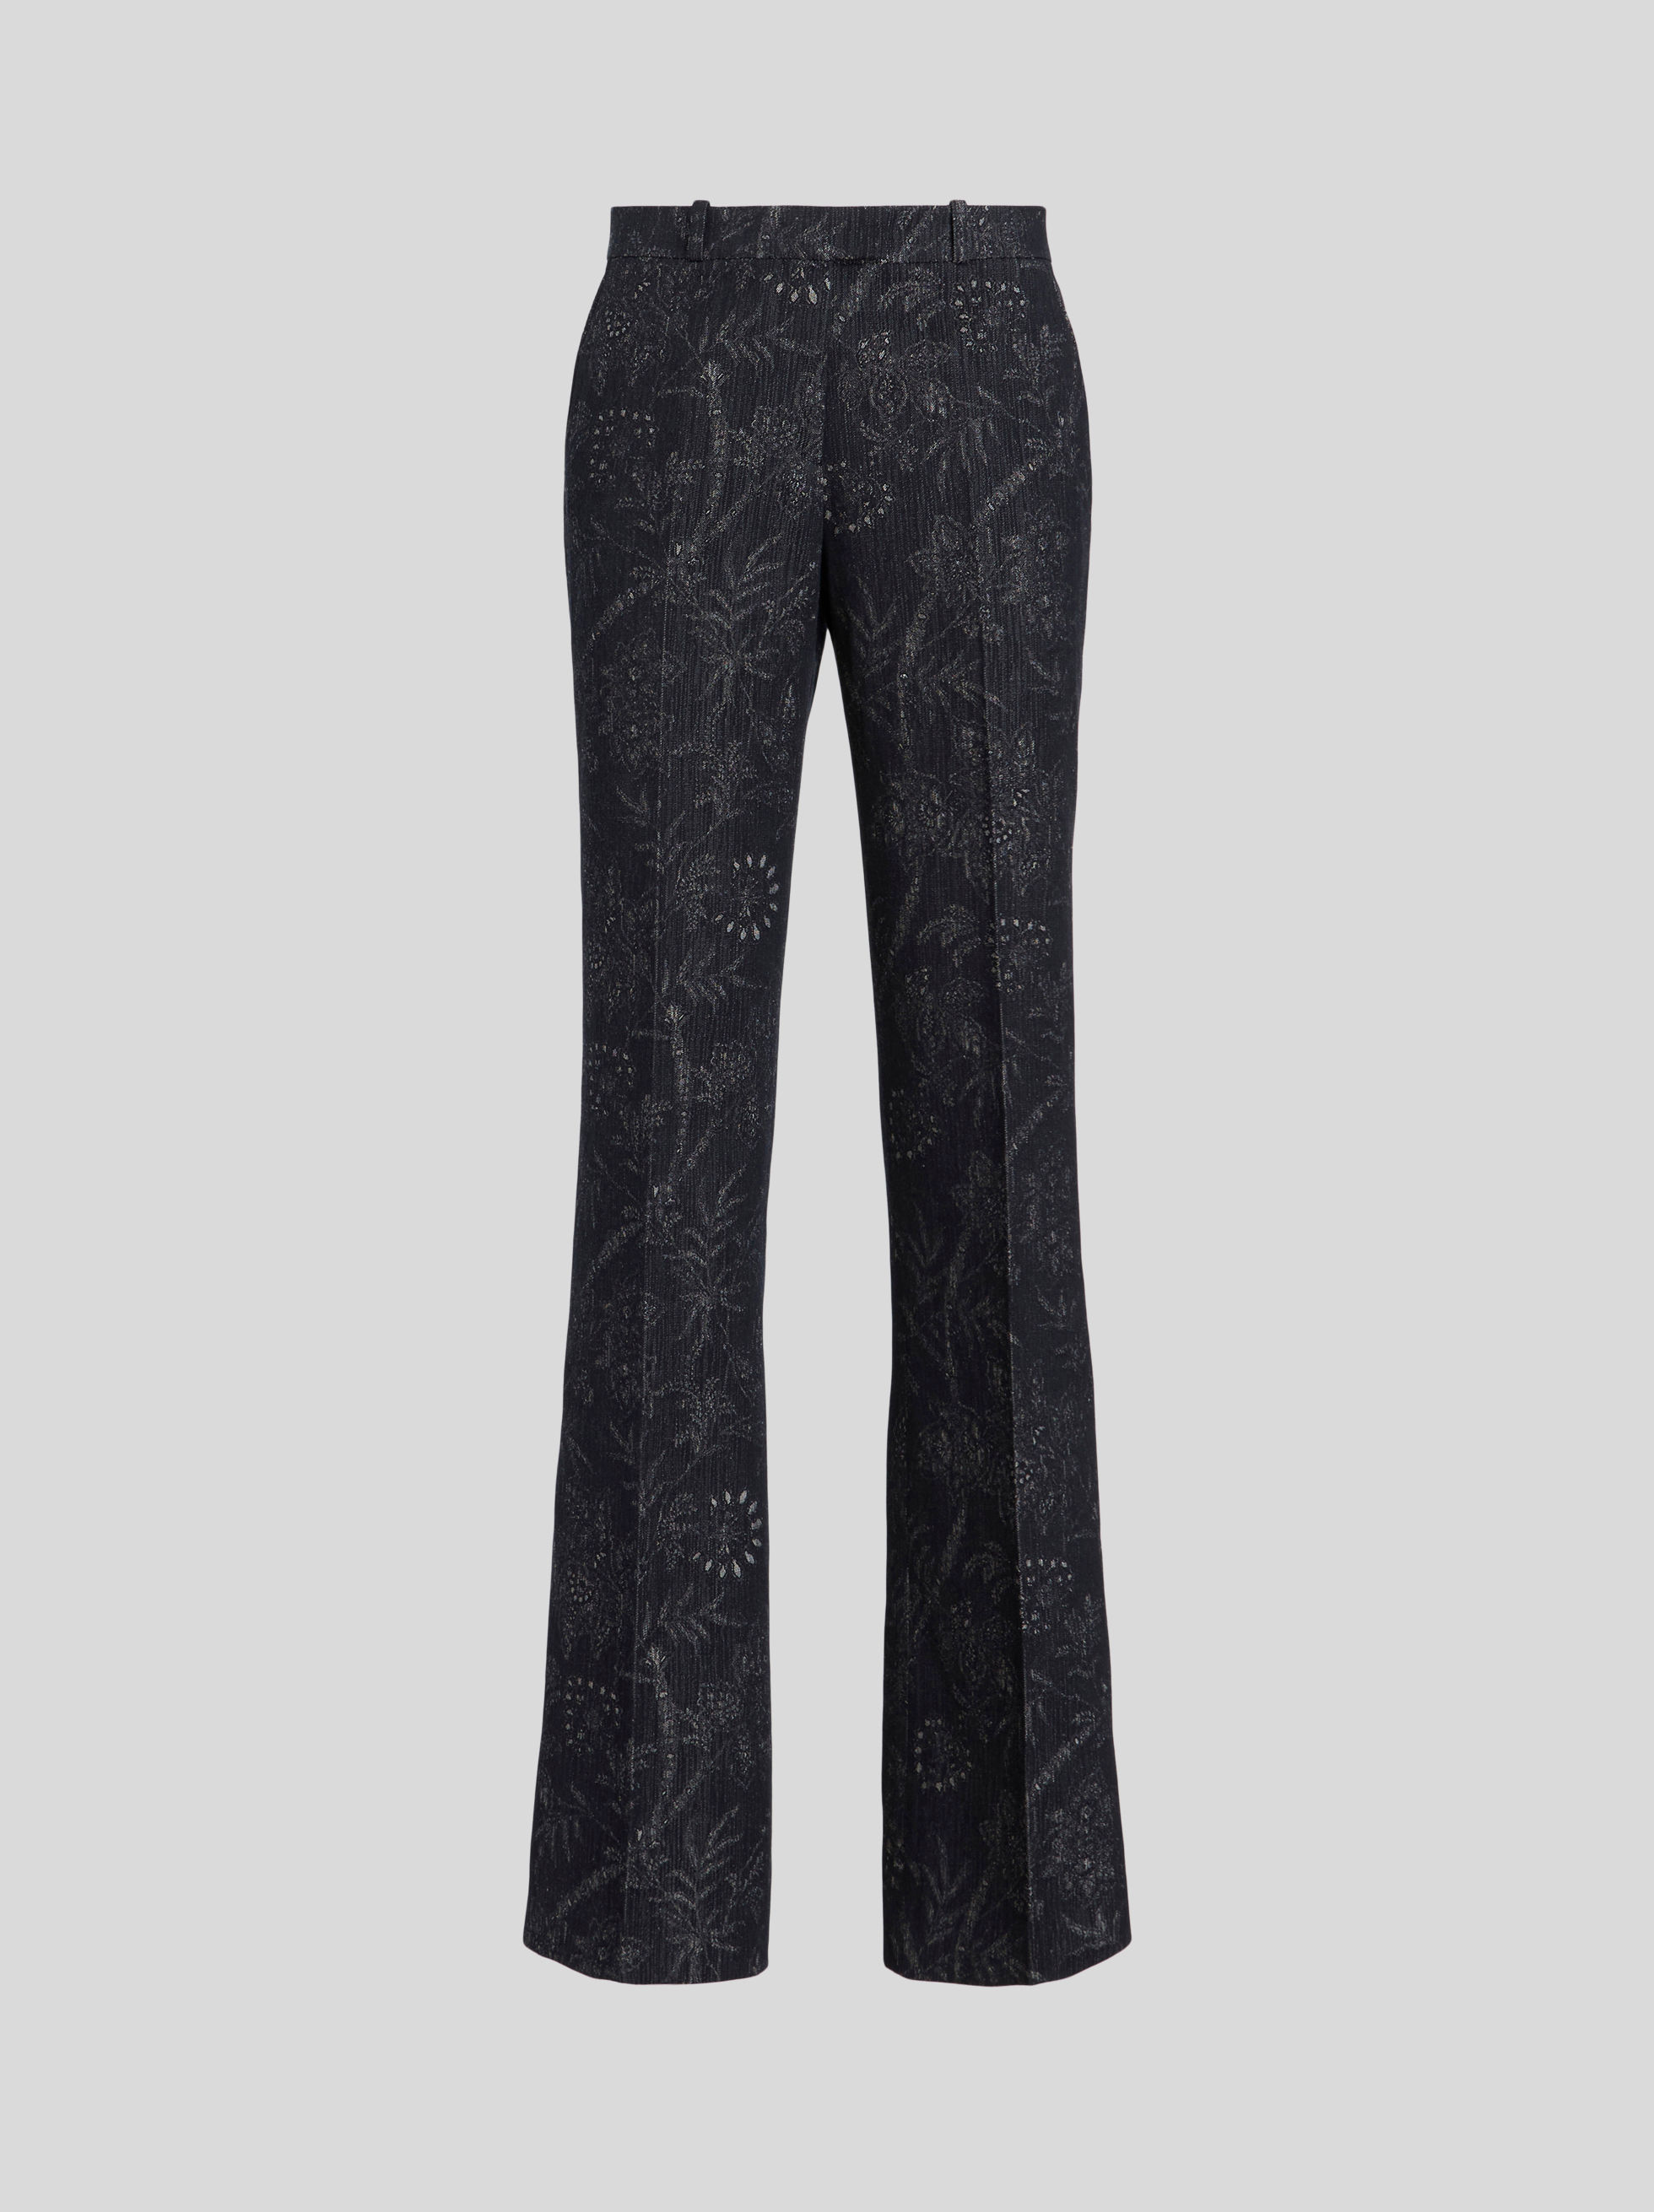 TAILORED JACQUARD TROUSERS